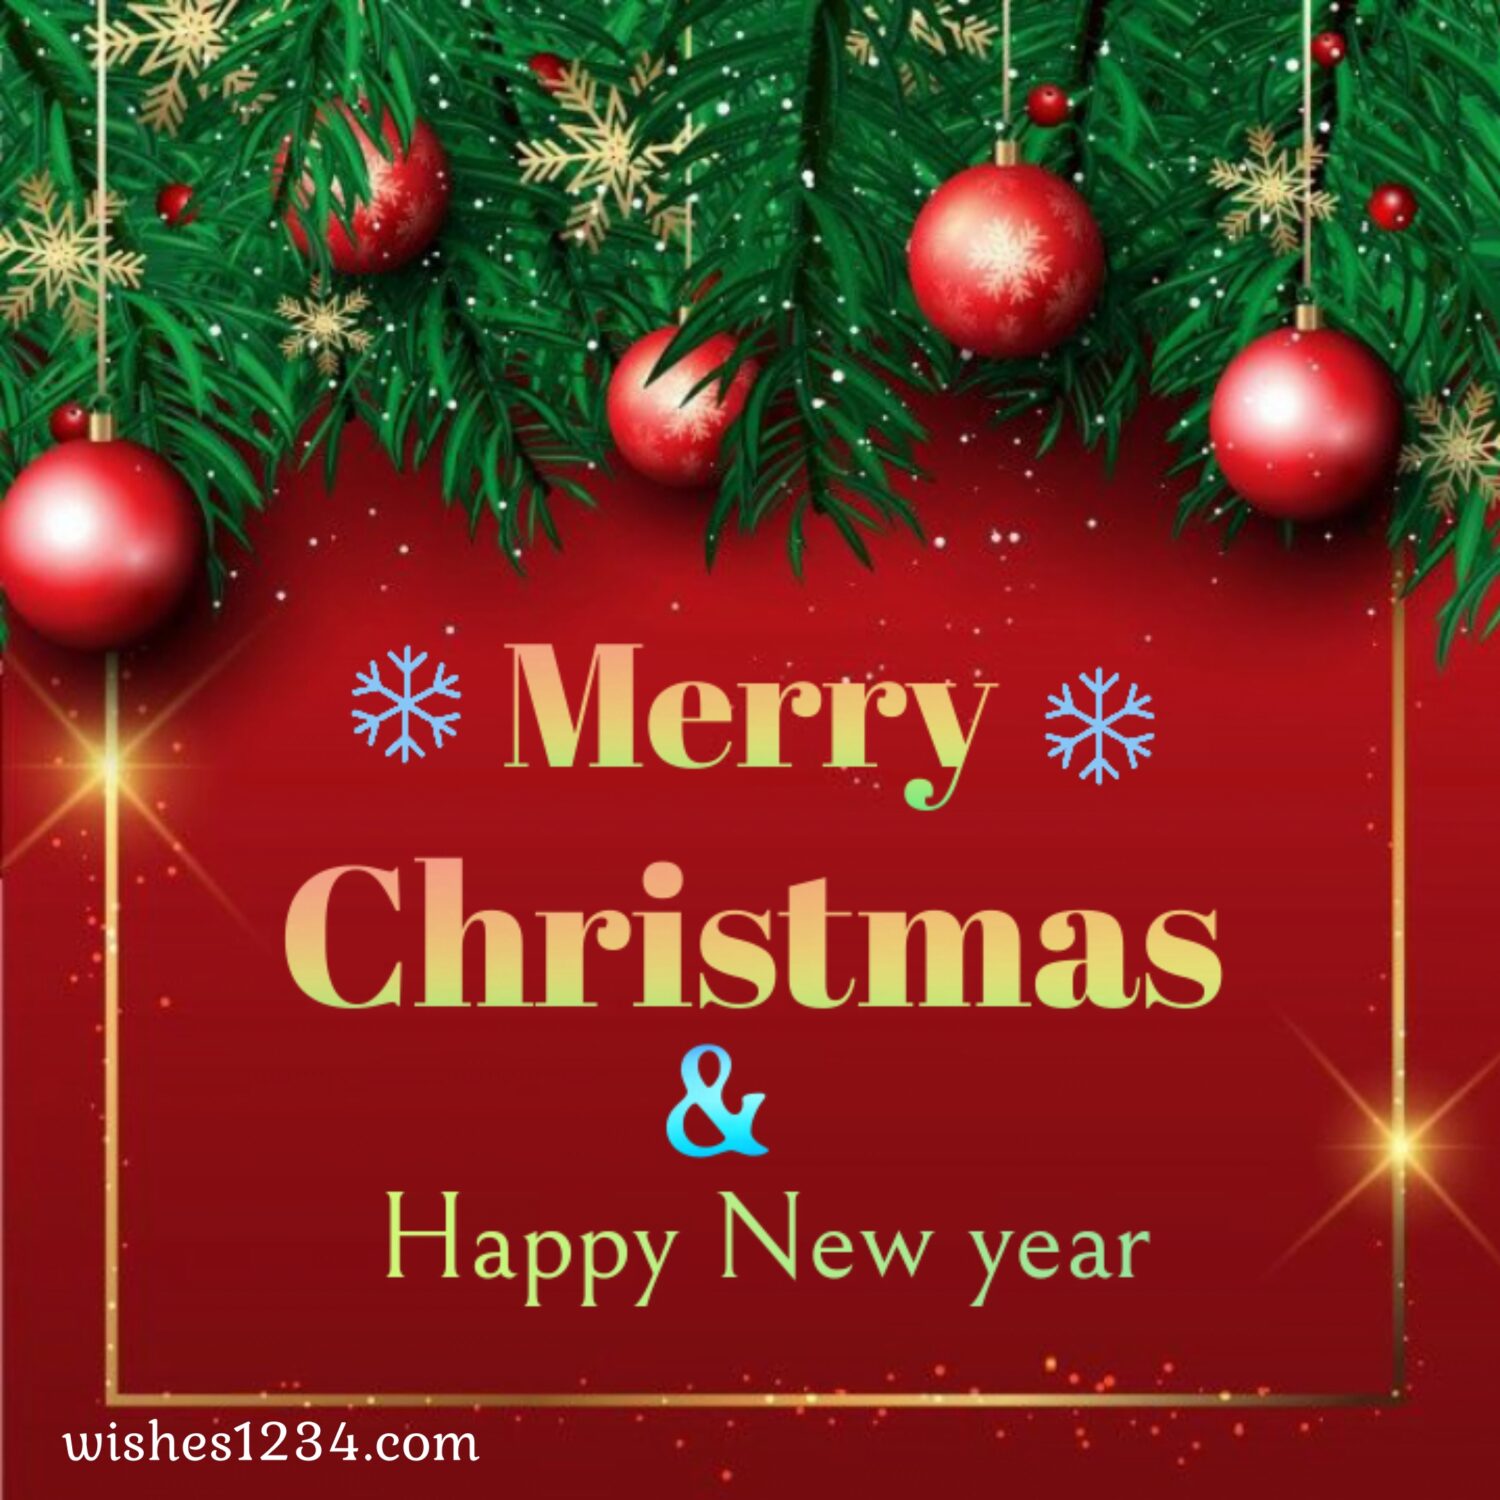 Christmas greetings with balls, Merry Christmas Quotes & short wishes.